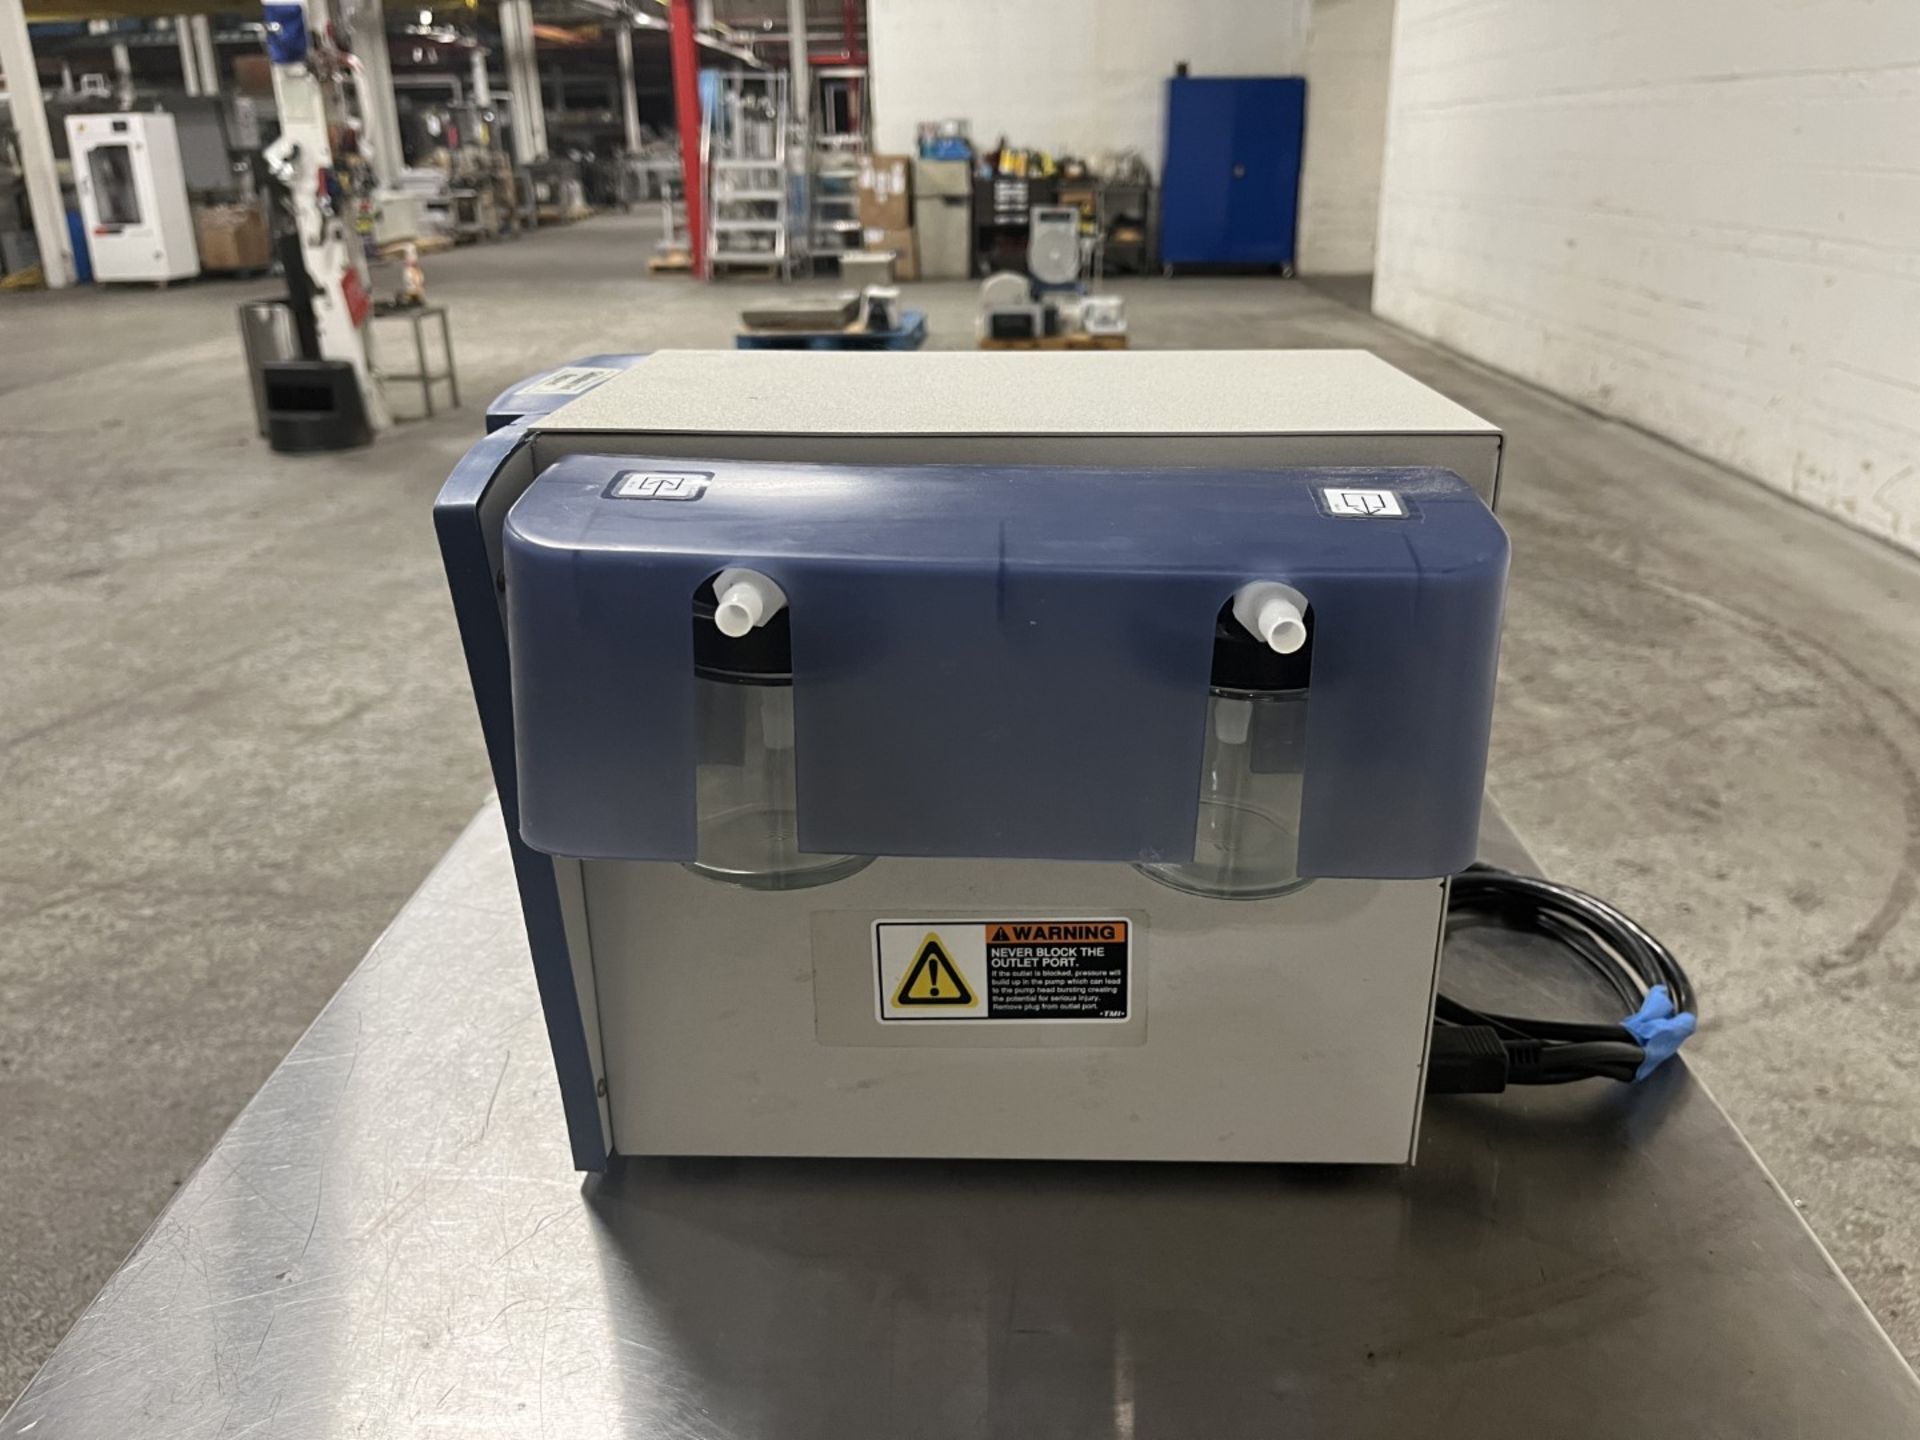 Welch self-cleaning dry vacuum system, model 202501, 115 volt, serial# 00001111, built in 2015. (TAG - Image 3 of 5